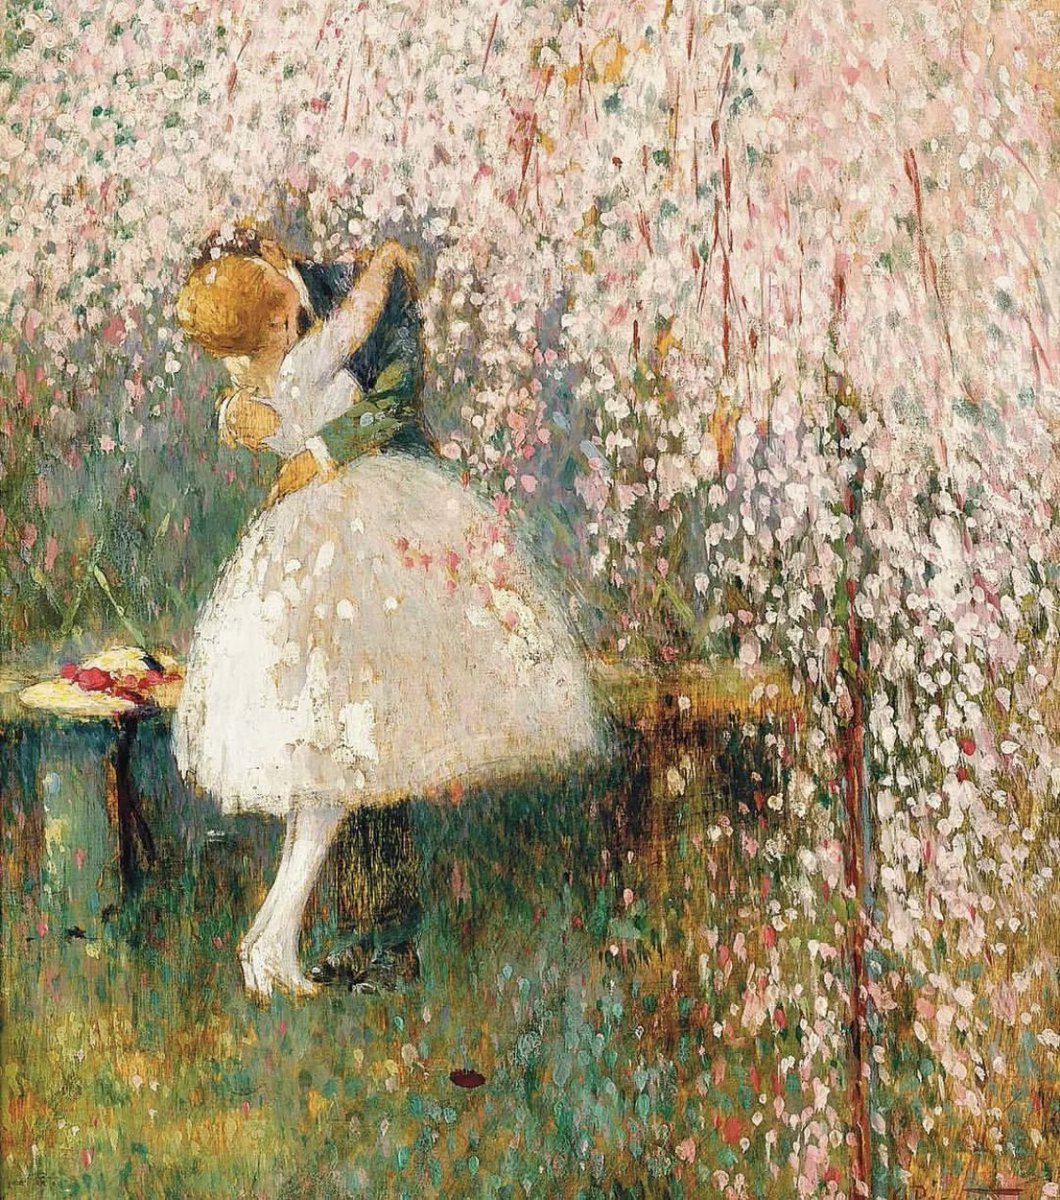 Romance under the Blossom Tree by Georges Picard (1857-1946)